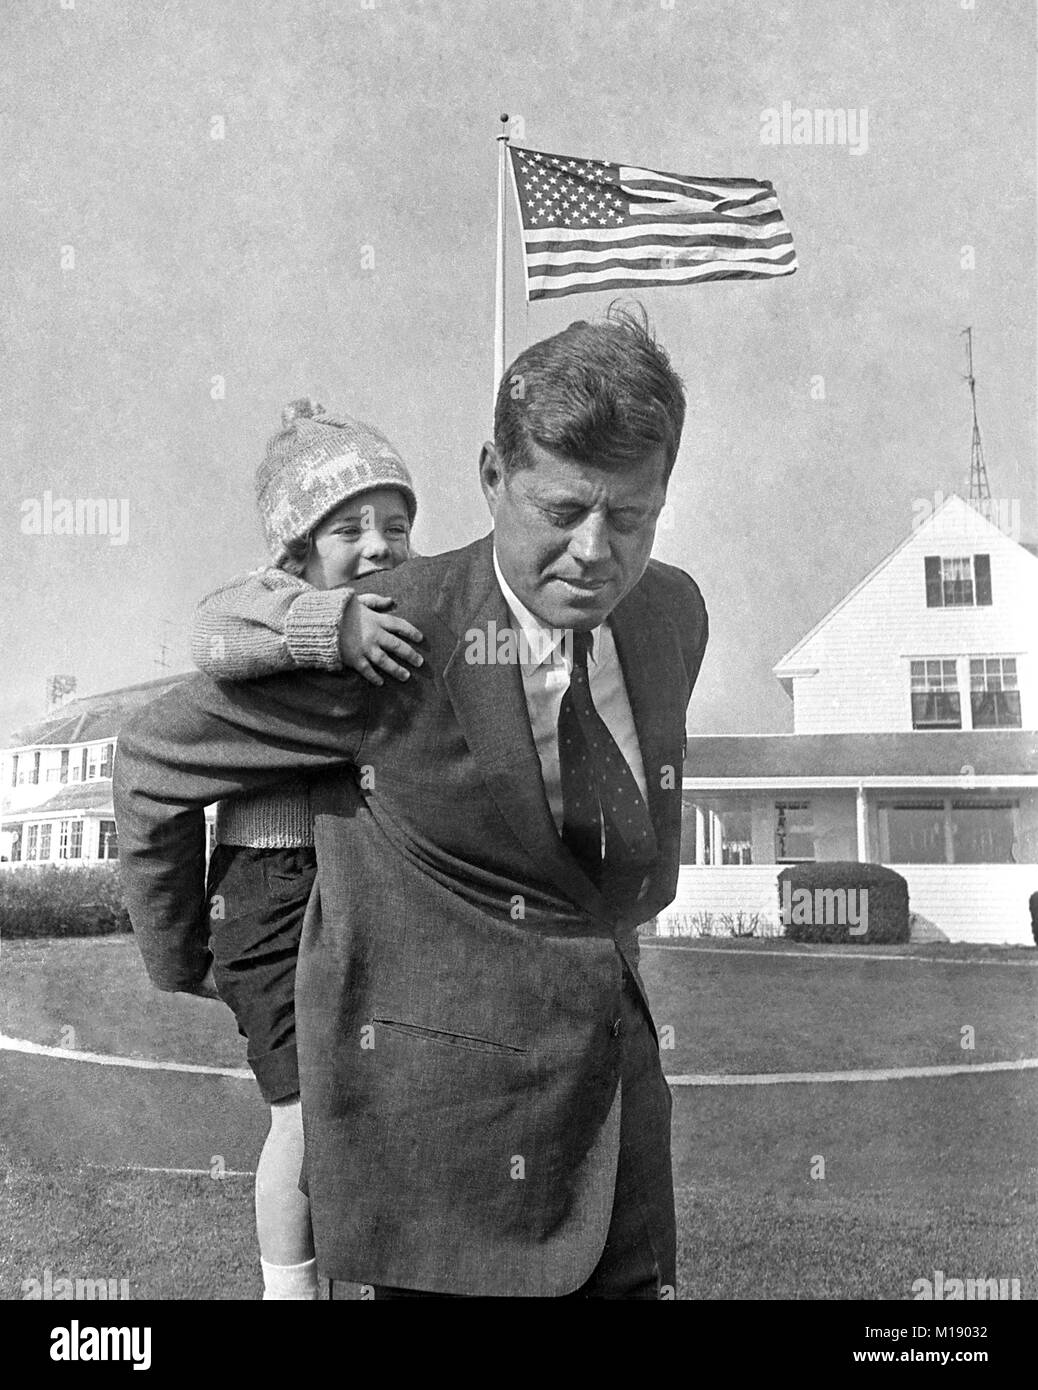 John F. Kennedy gives daughter Caroline Kennedy a piggy back ride, Hyannis Port, Massachusetts. November 9, 1960, The day after his election as president Stock Photo